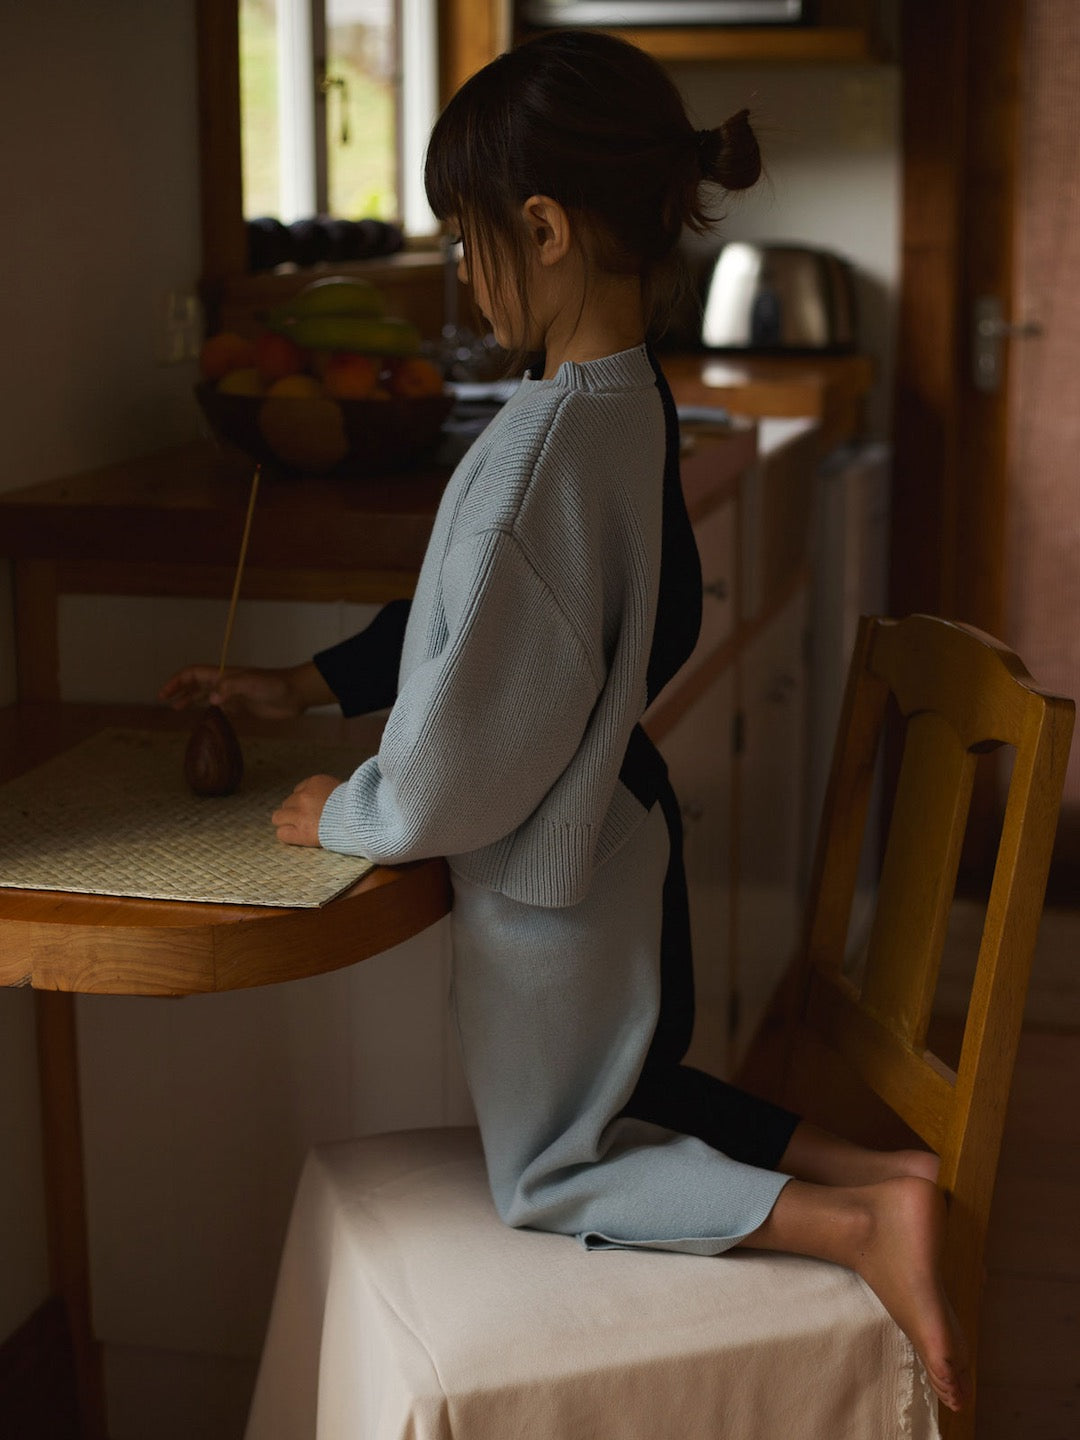 A little girl sitting on a chair in a kitchen wearing the SOL Sweater – Blue Multi by Sunna Studios.